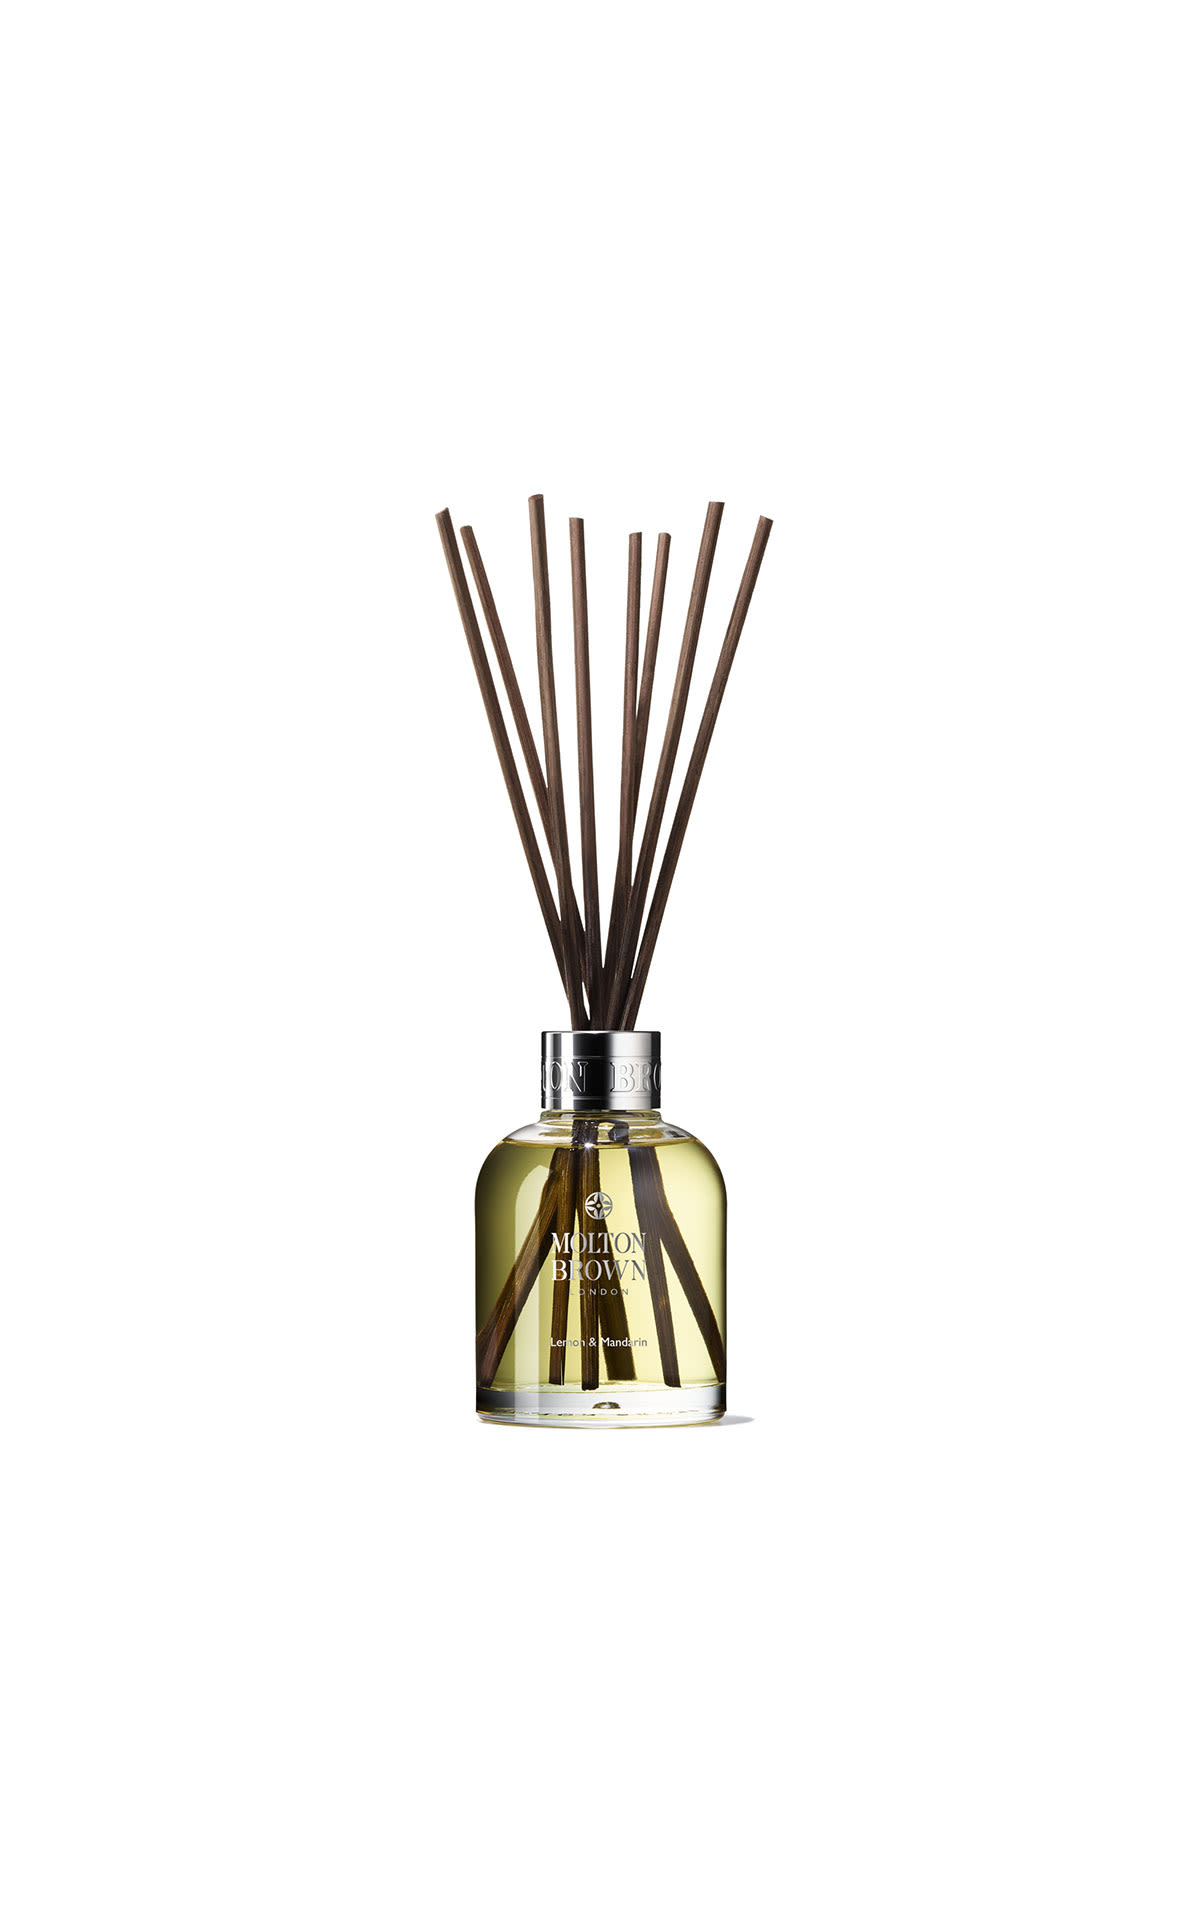 Molton Brown Lemon and mandarin diffuser  from Bicester Village